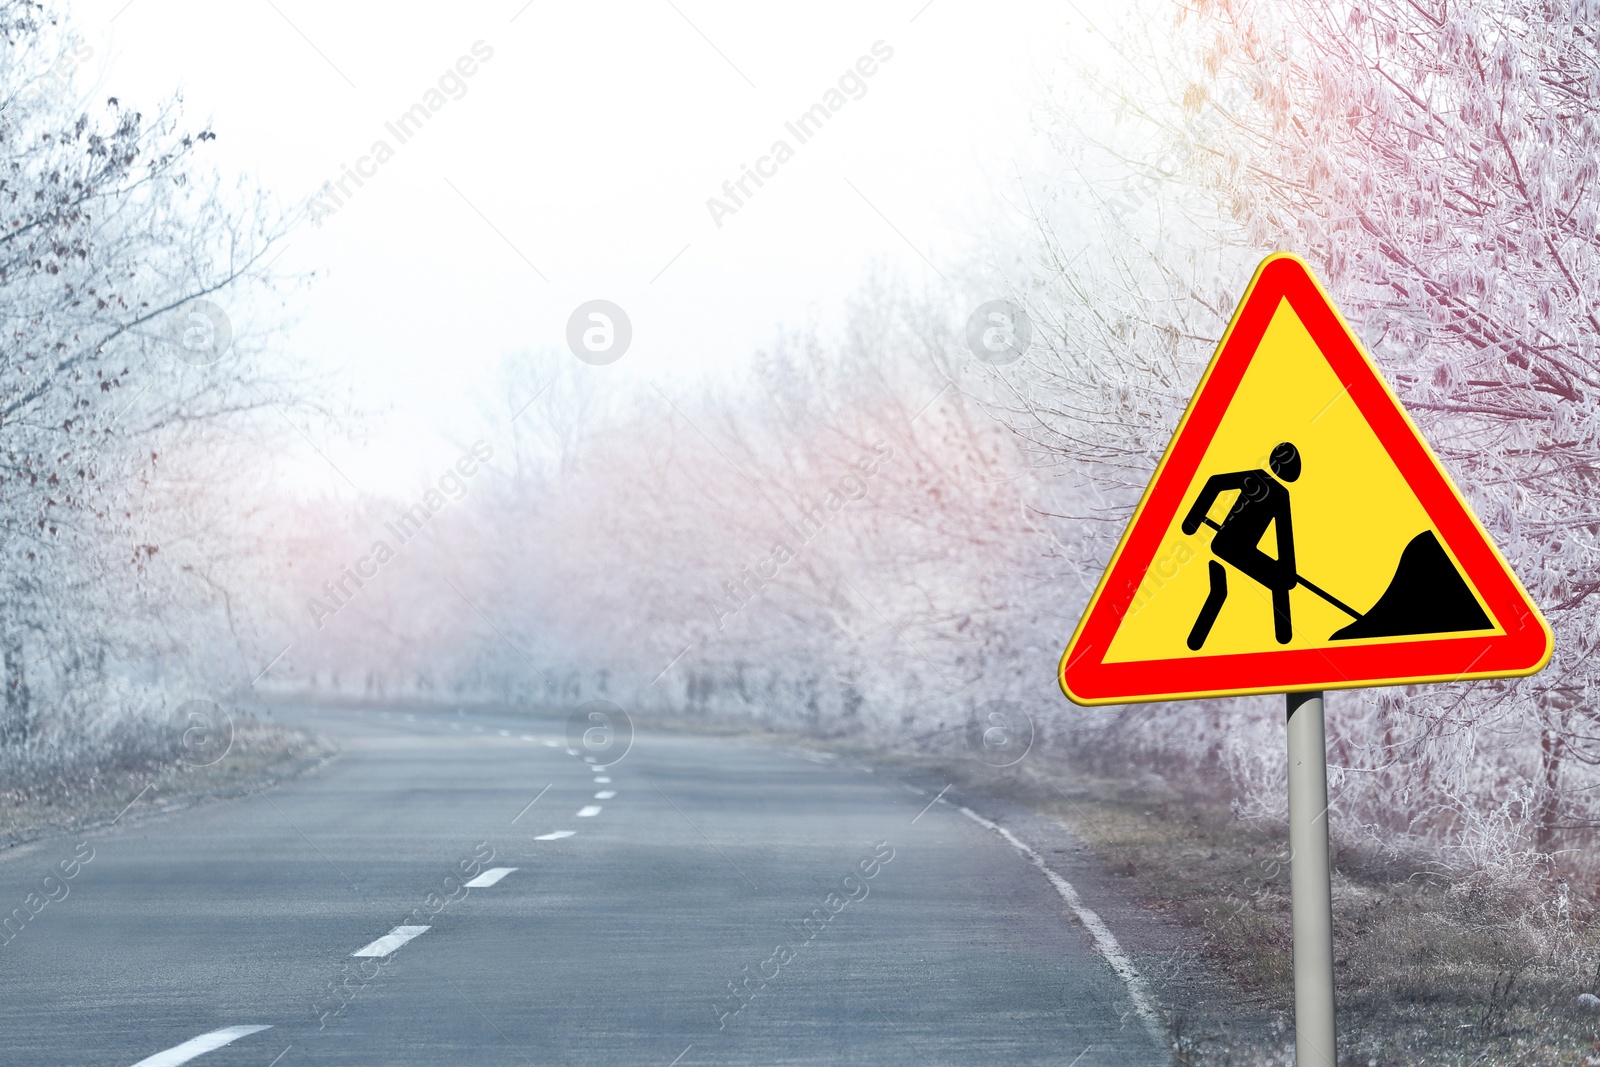 Image of Traffic sign Road Works near empty highway on winter day